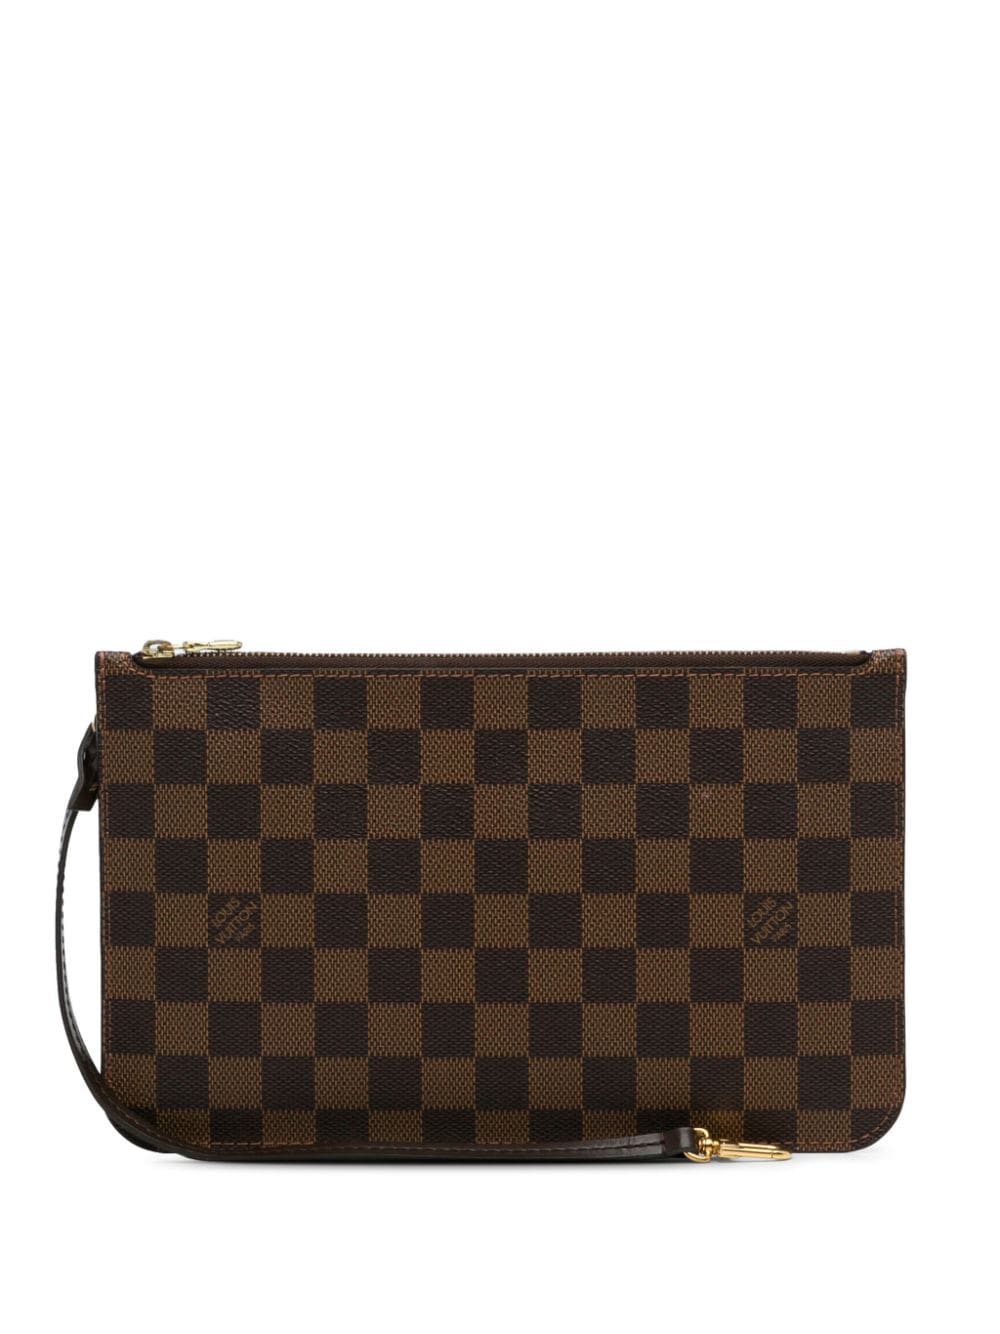 Pre-owned Louis Vuitton 2014 Damier Ebene Neverfull Mm Pouch In Brown